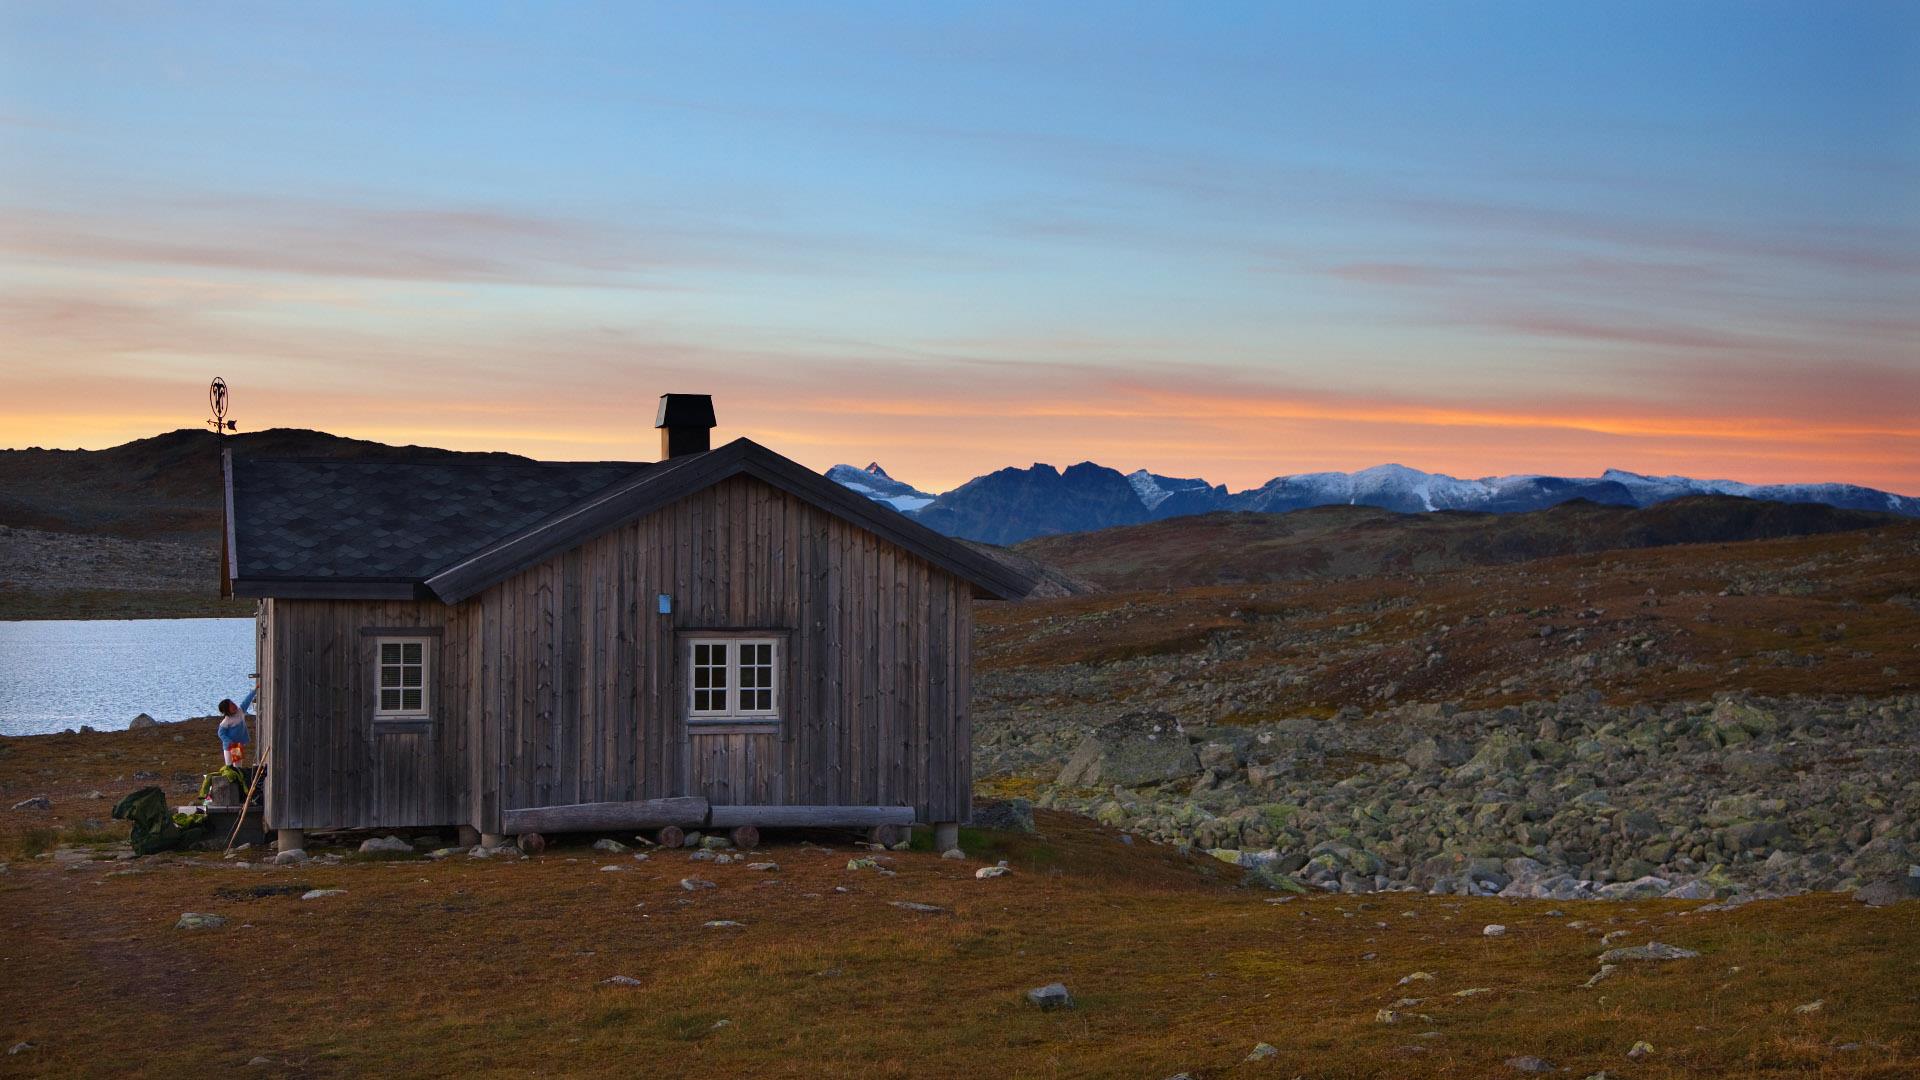 A cabin by a lake in the mountains. The sunset paints the sky over a pointed row of high peaks in the horizon orange.